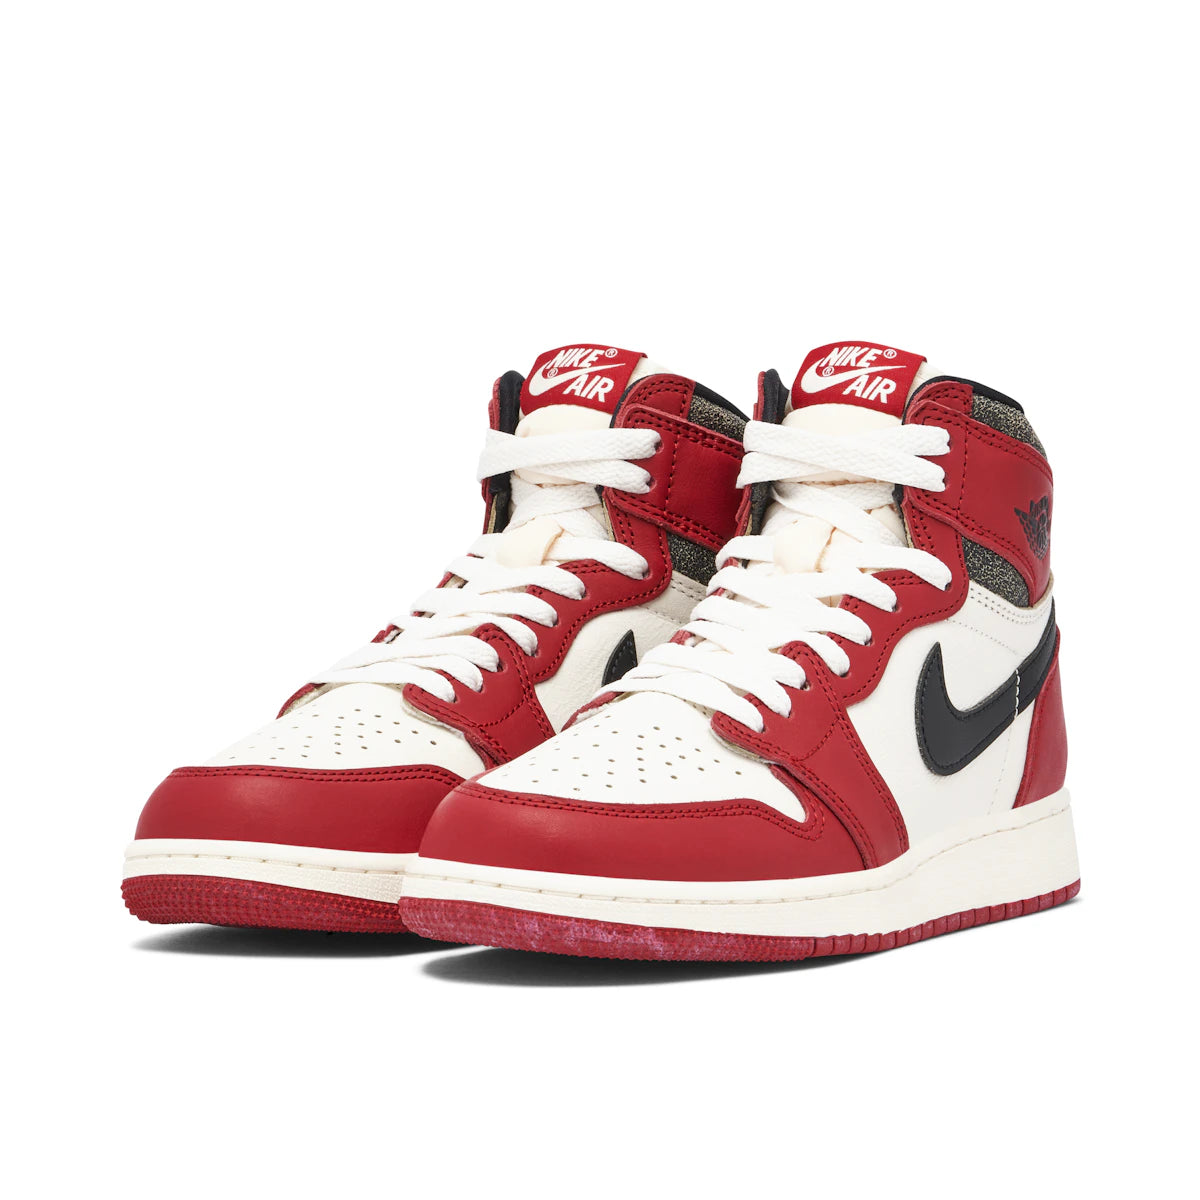 Jordan 1 Retro High OG Chicago Lost and Found (GS) by Jordan's from £203.00